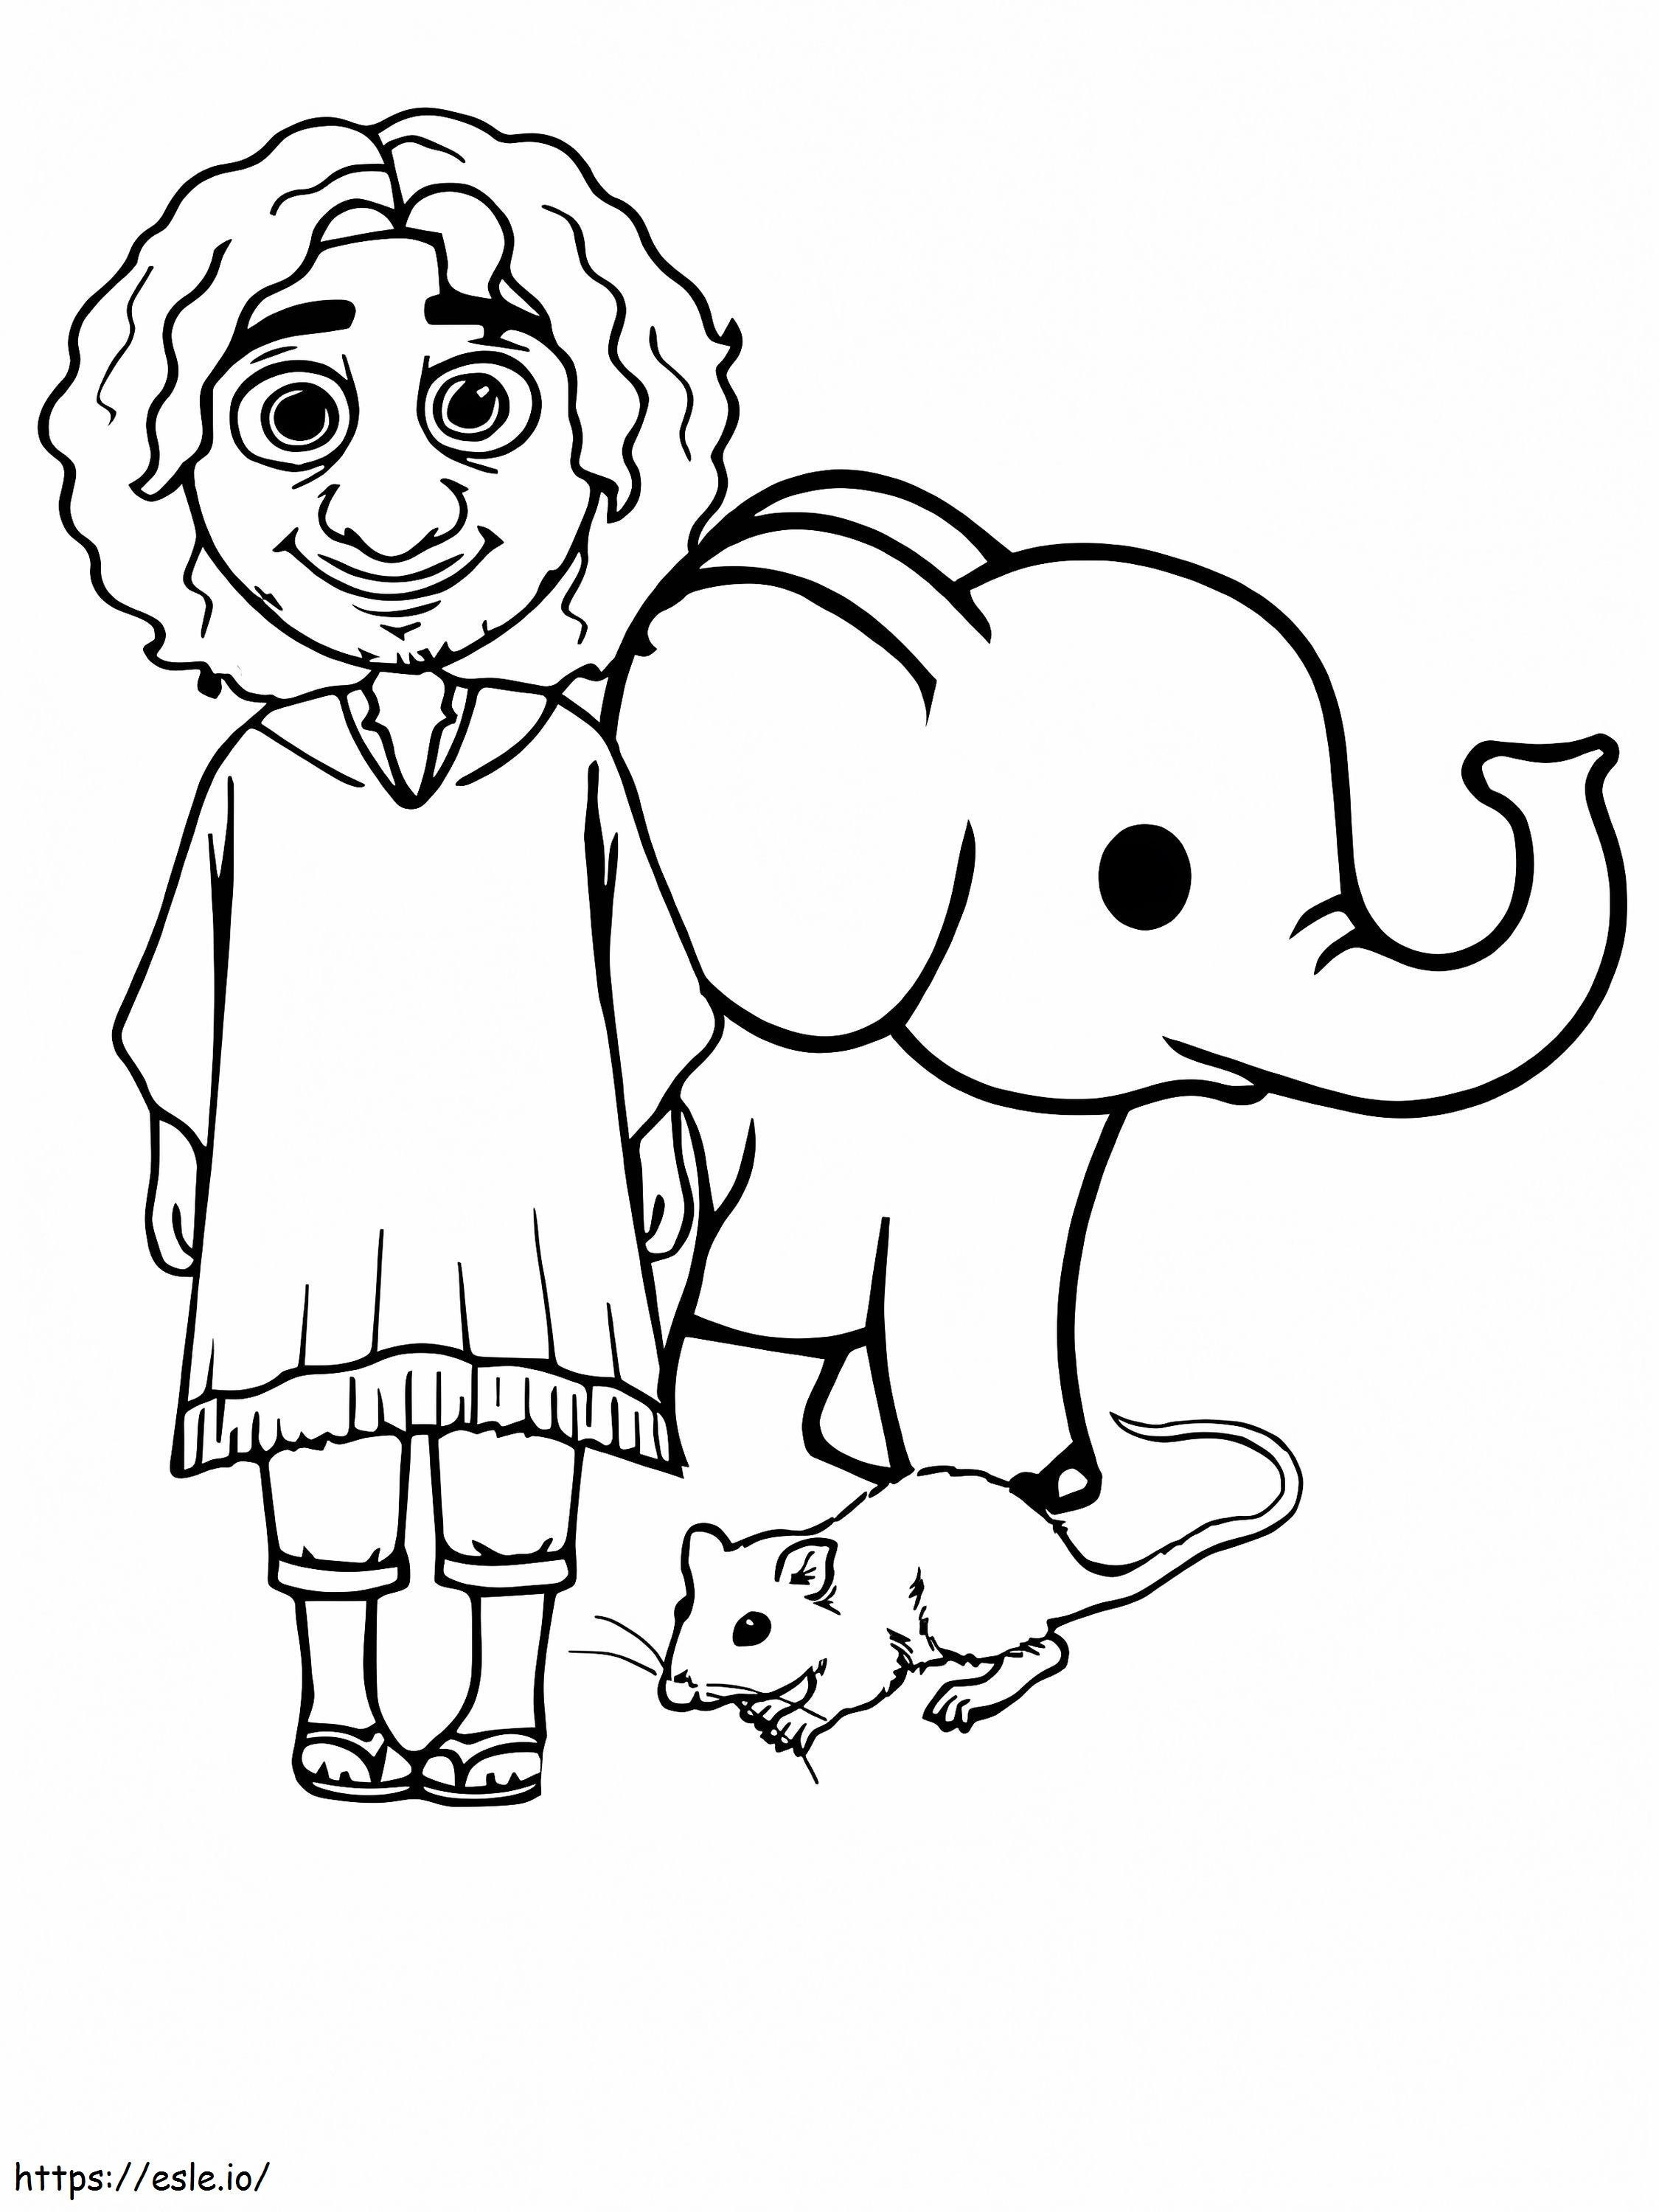 Rat And Elephant Bruno Charm coloring page